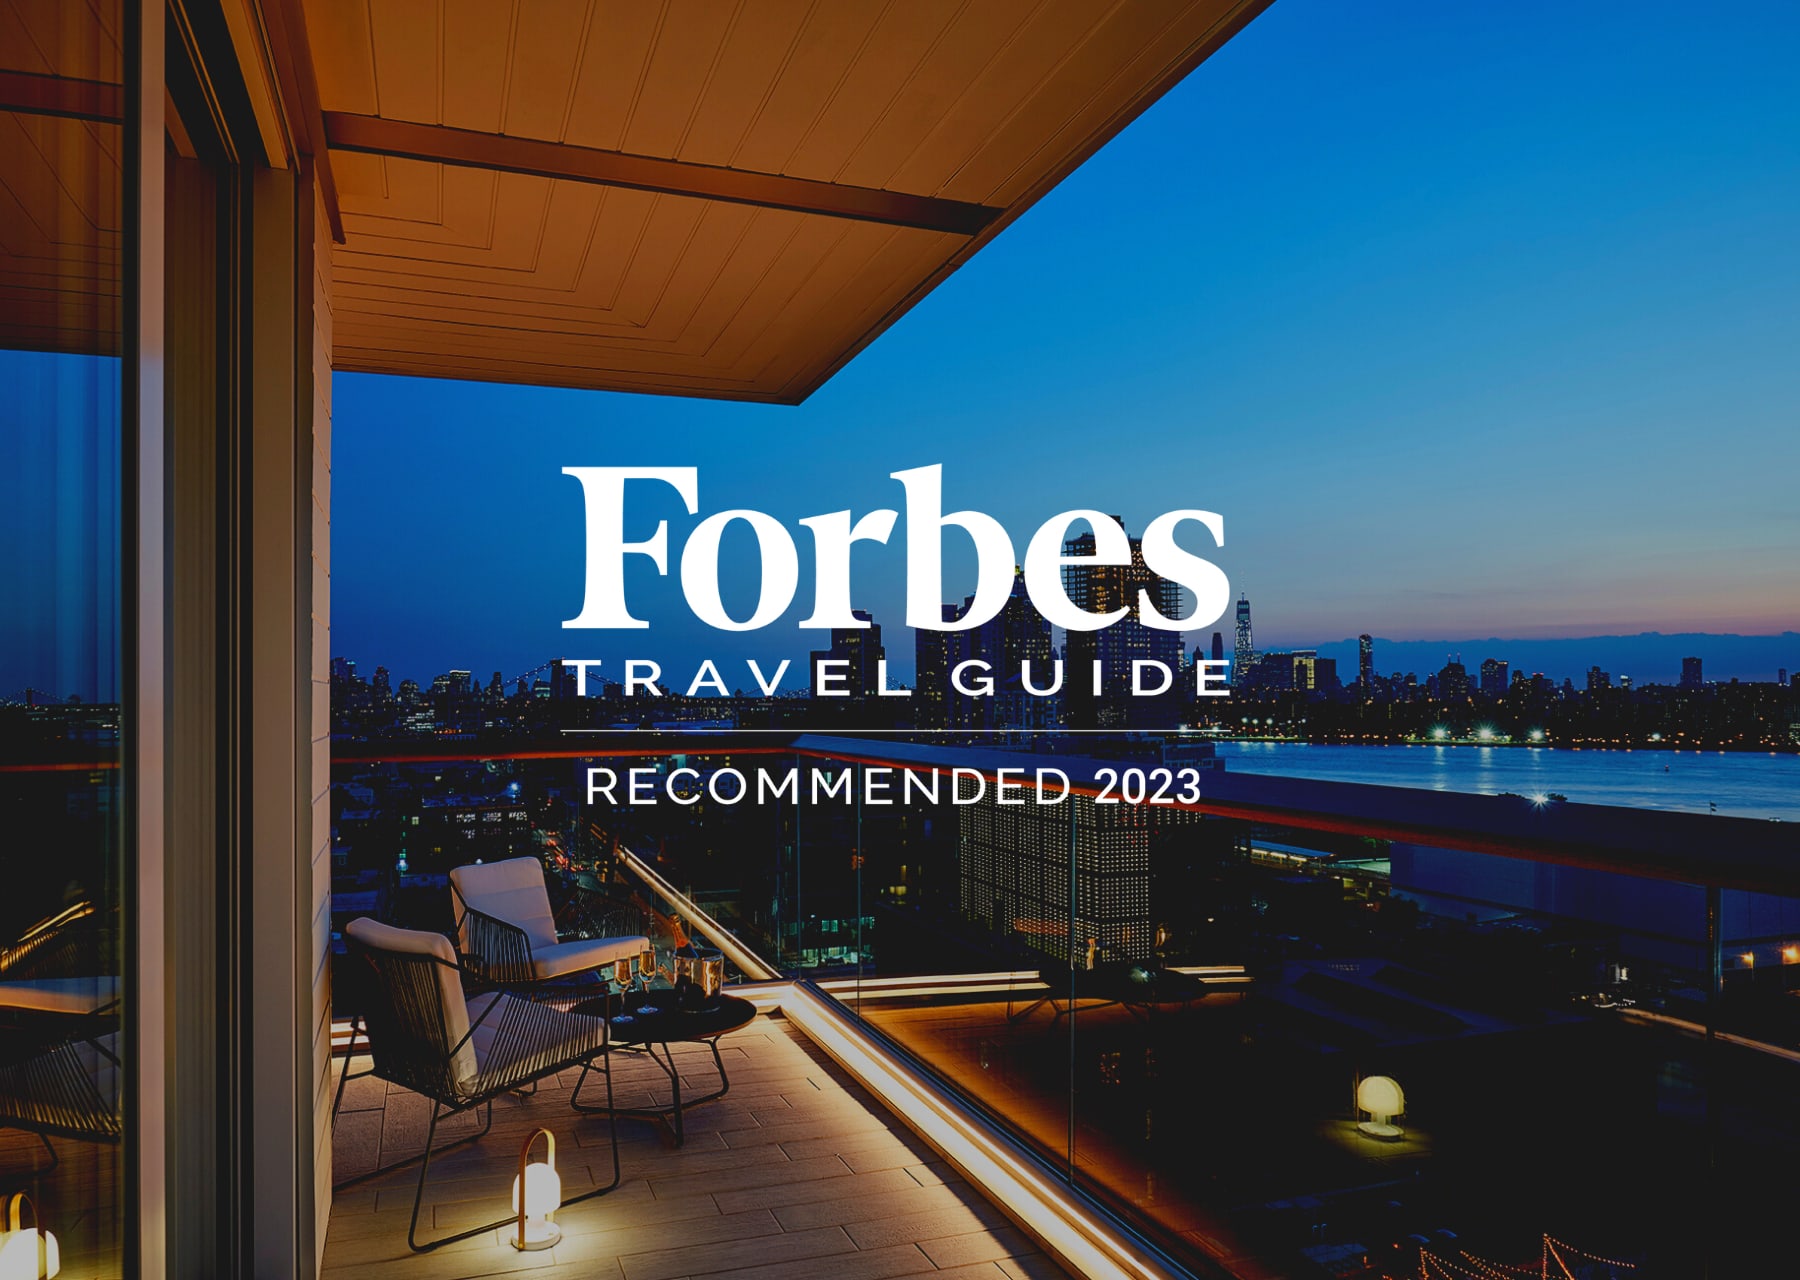 forbes travel guide recommended